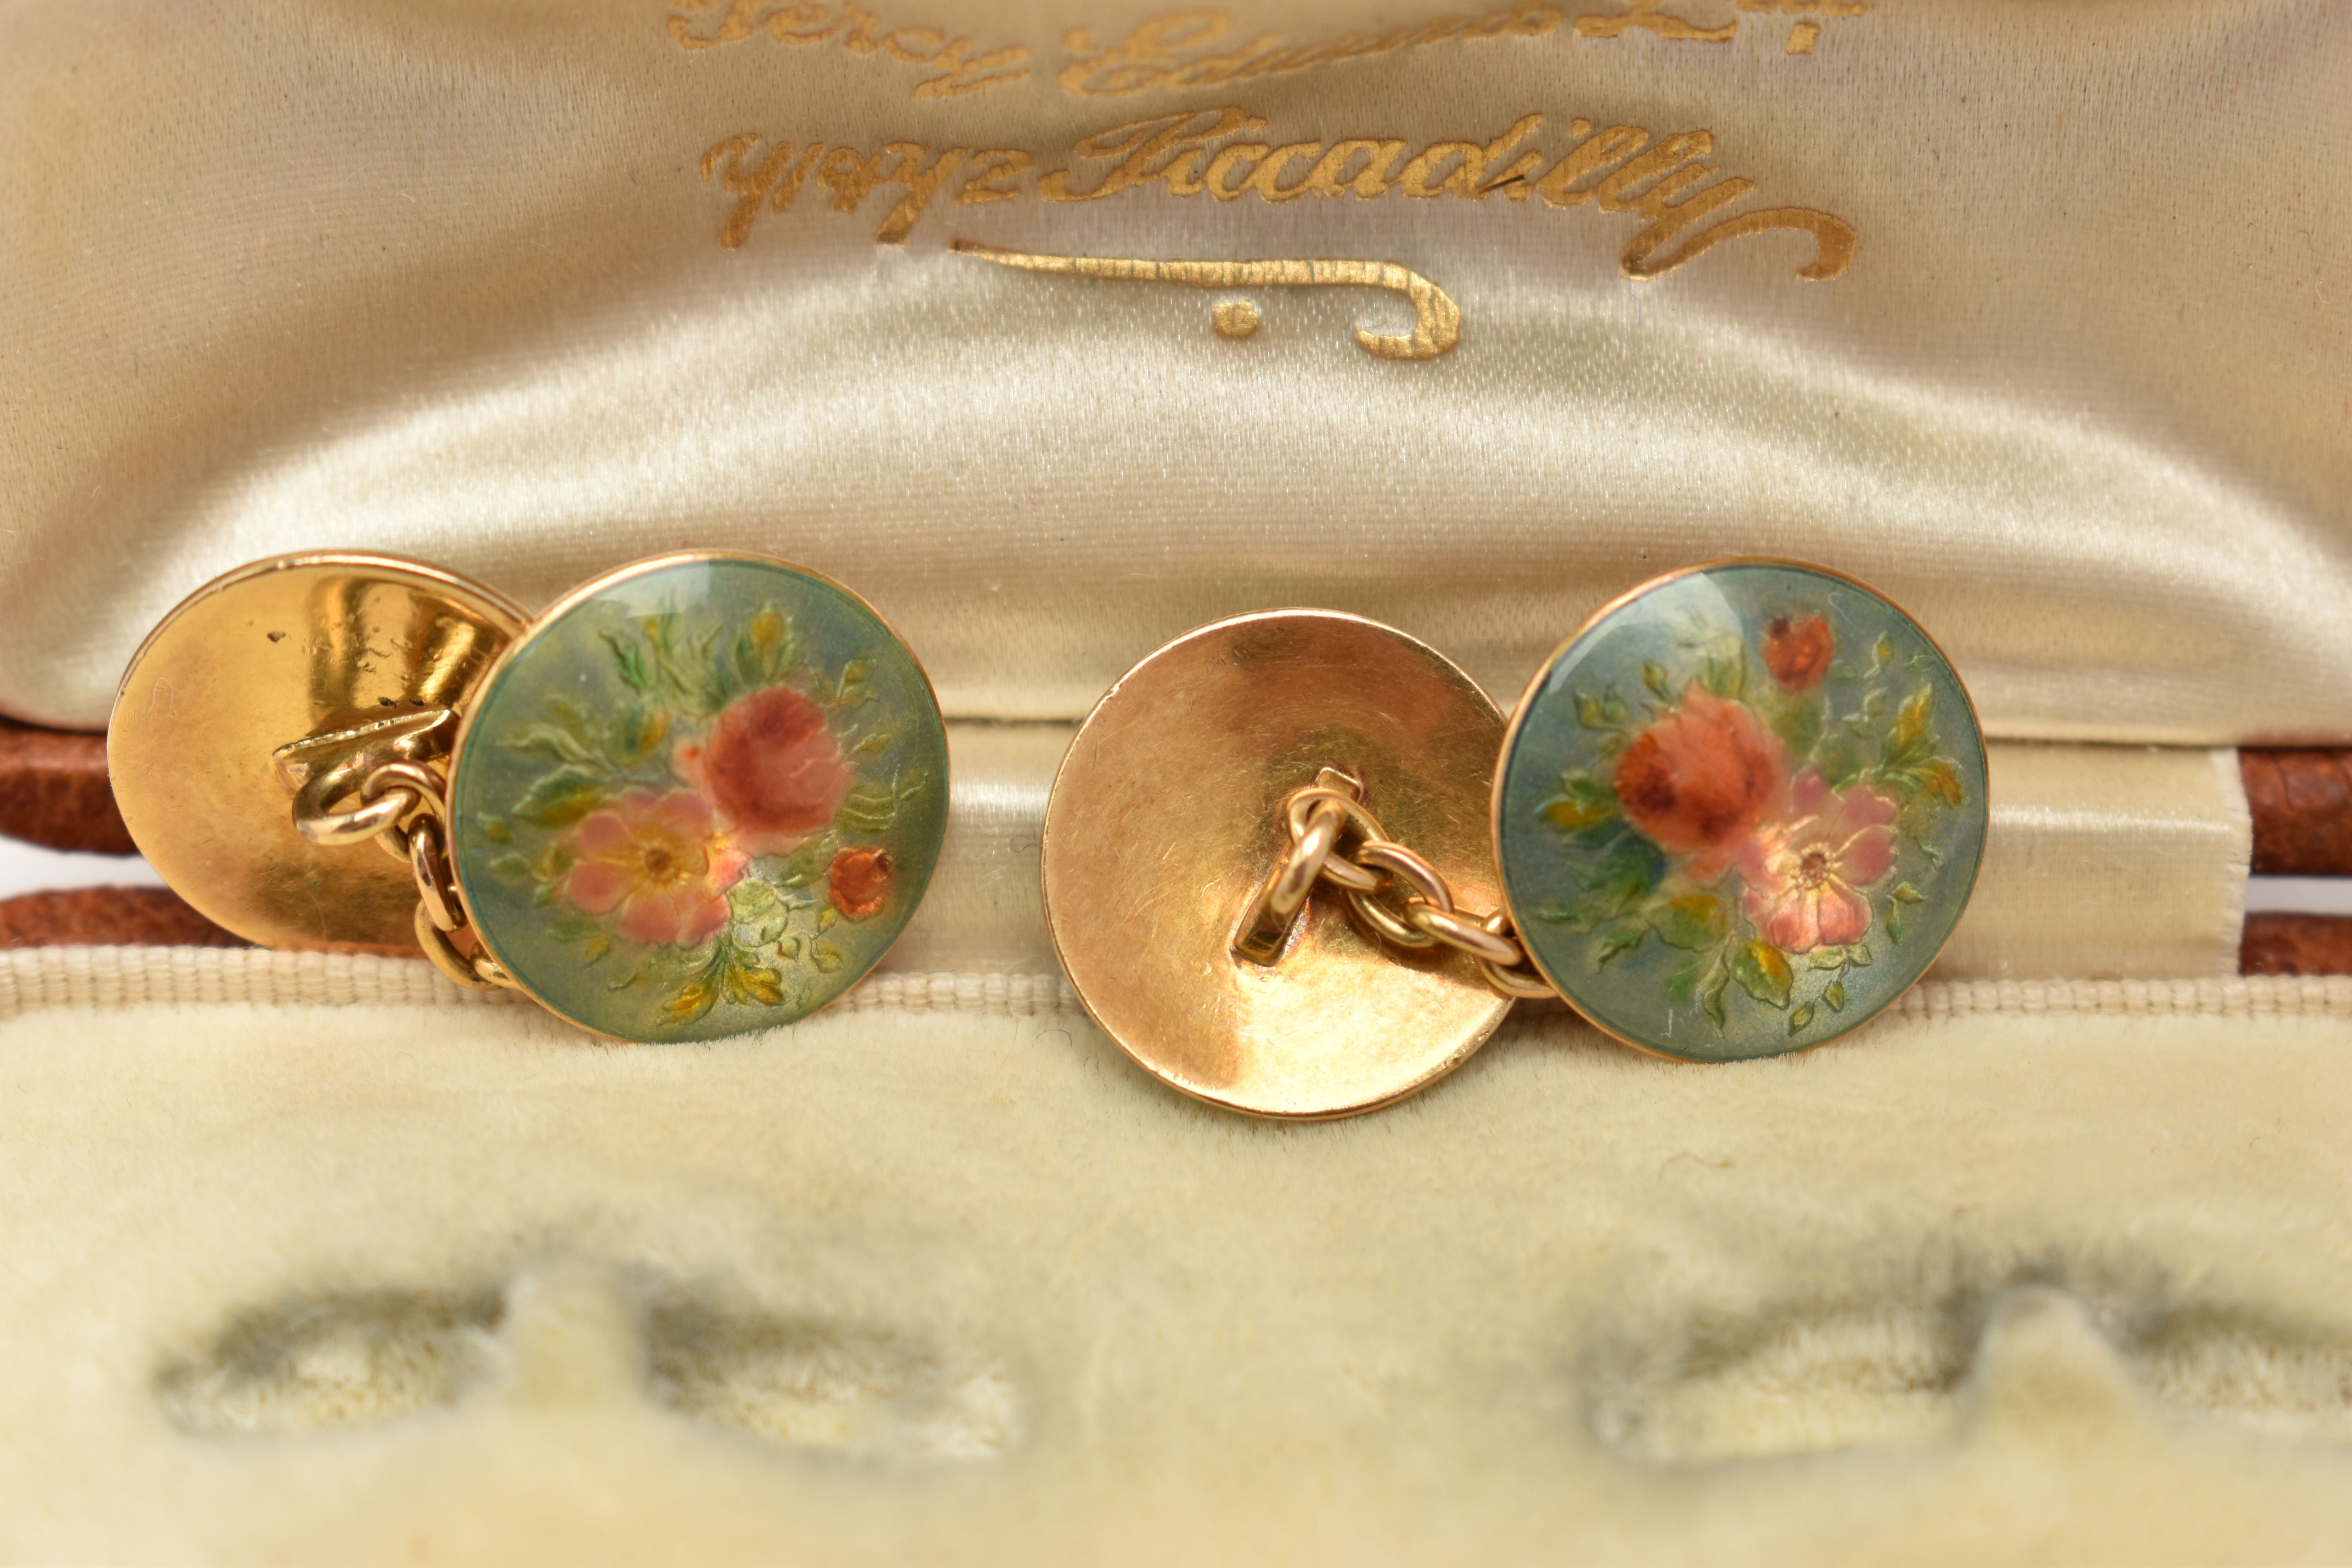 A PAIR OF ENAMEL CUFFLINKS, designed as circular panels with floral enamel decoration and chain link - Image 2 of 3